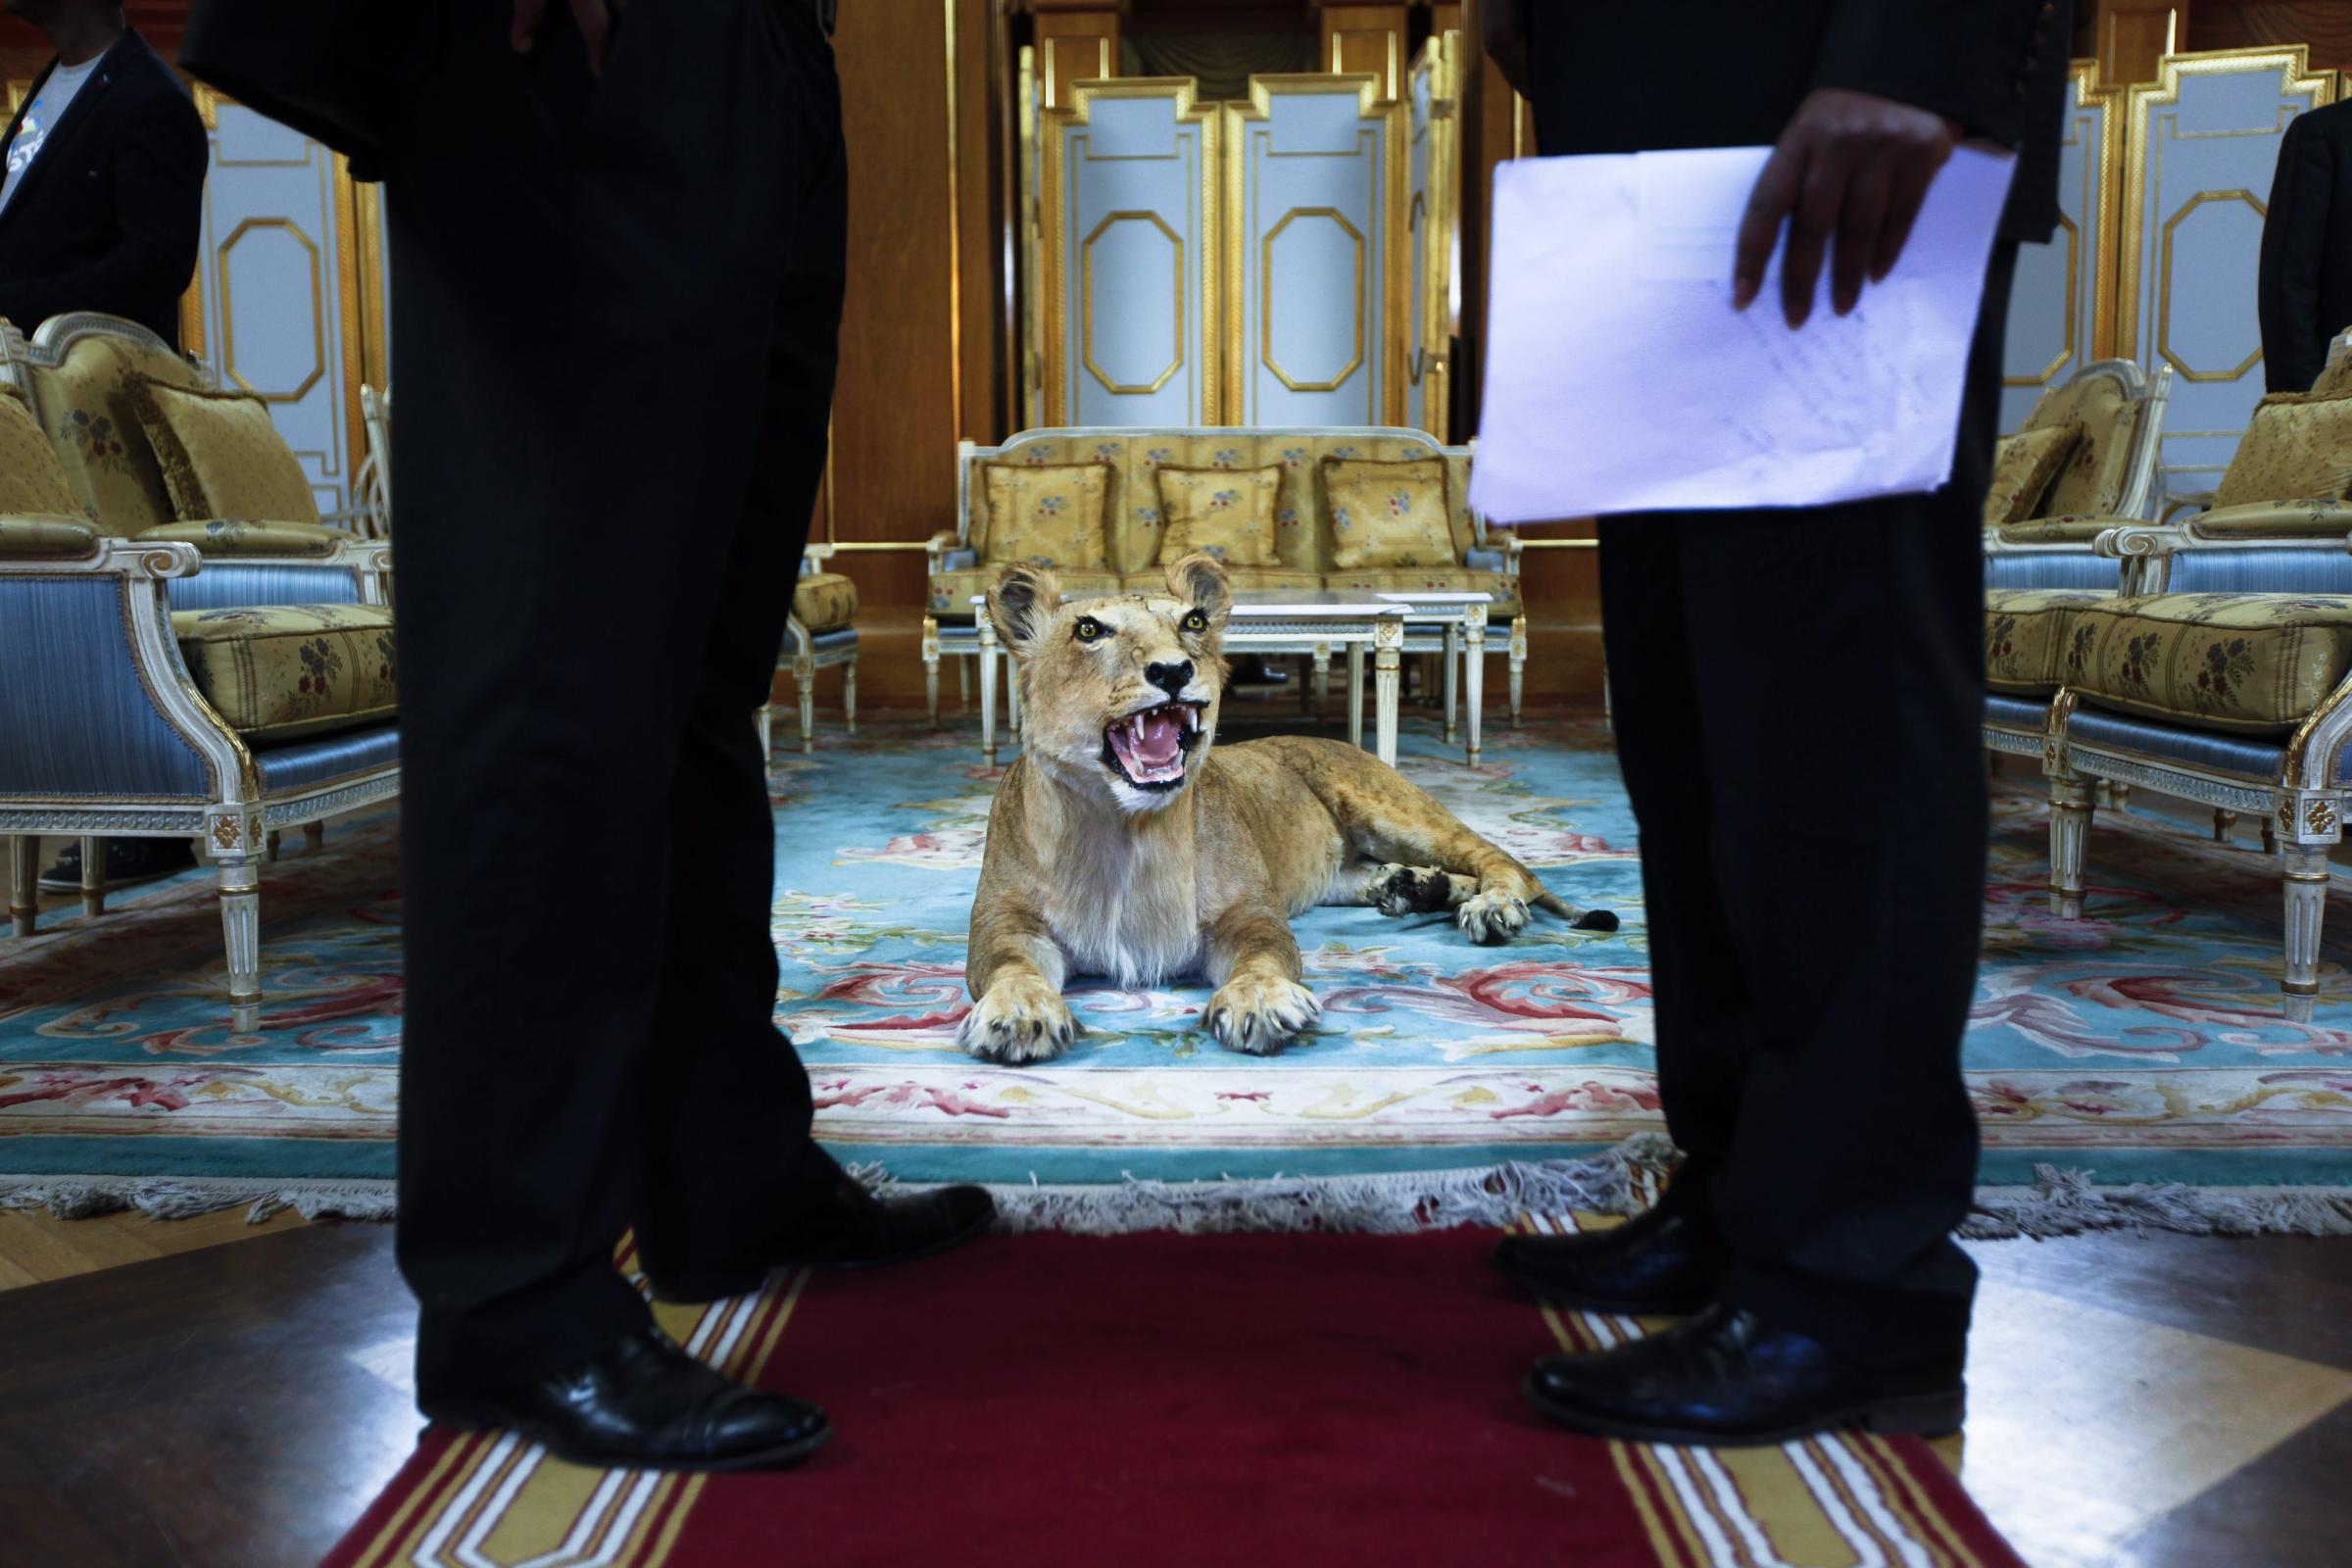 A stuffed lion on display is seen between two Ethiopian officials prior to a meeting between Japanese Prime Minister, Shinzo Abe, and his Ethiopian counterpart, Hailemariam Desalegn, at the Presidential Palace in Addis Ababa, Ethiopia, Jan. 13,2014.